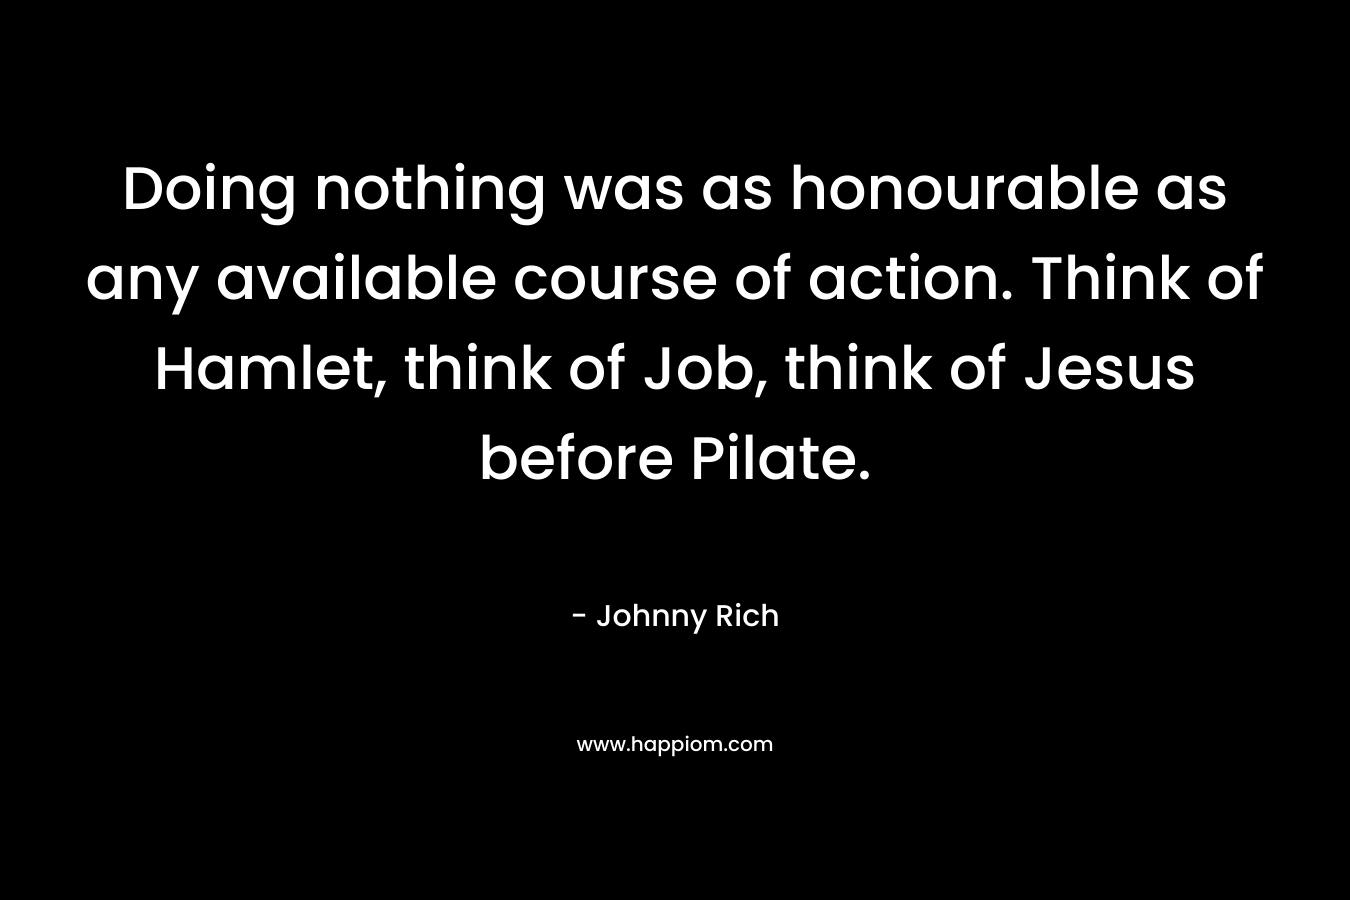 Doing nothing was as honourable as any available course of action. Think of Hamlet, think of Job, think of Jesus before Pilate. – Johnny Rich